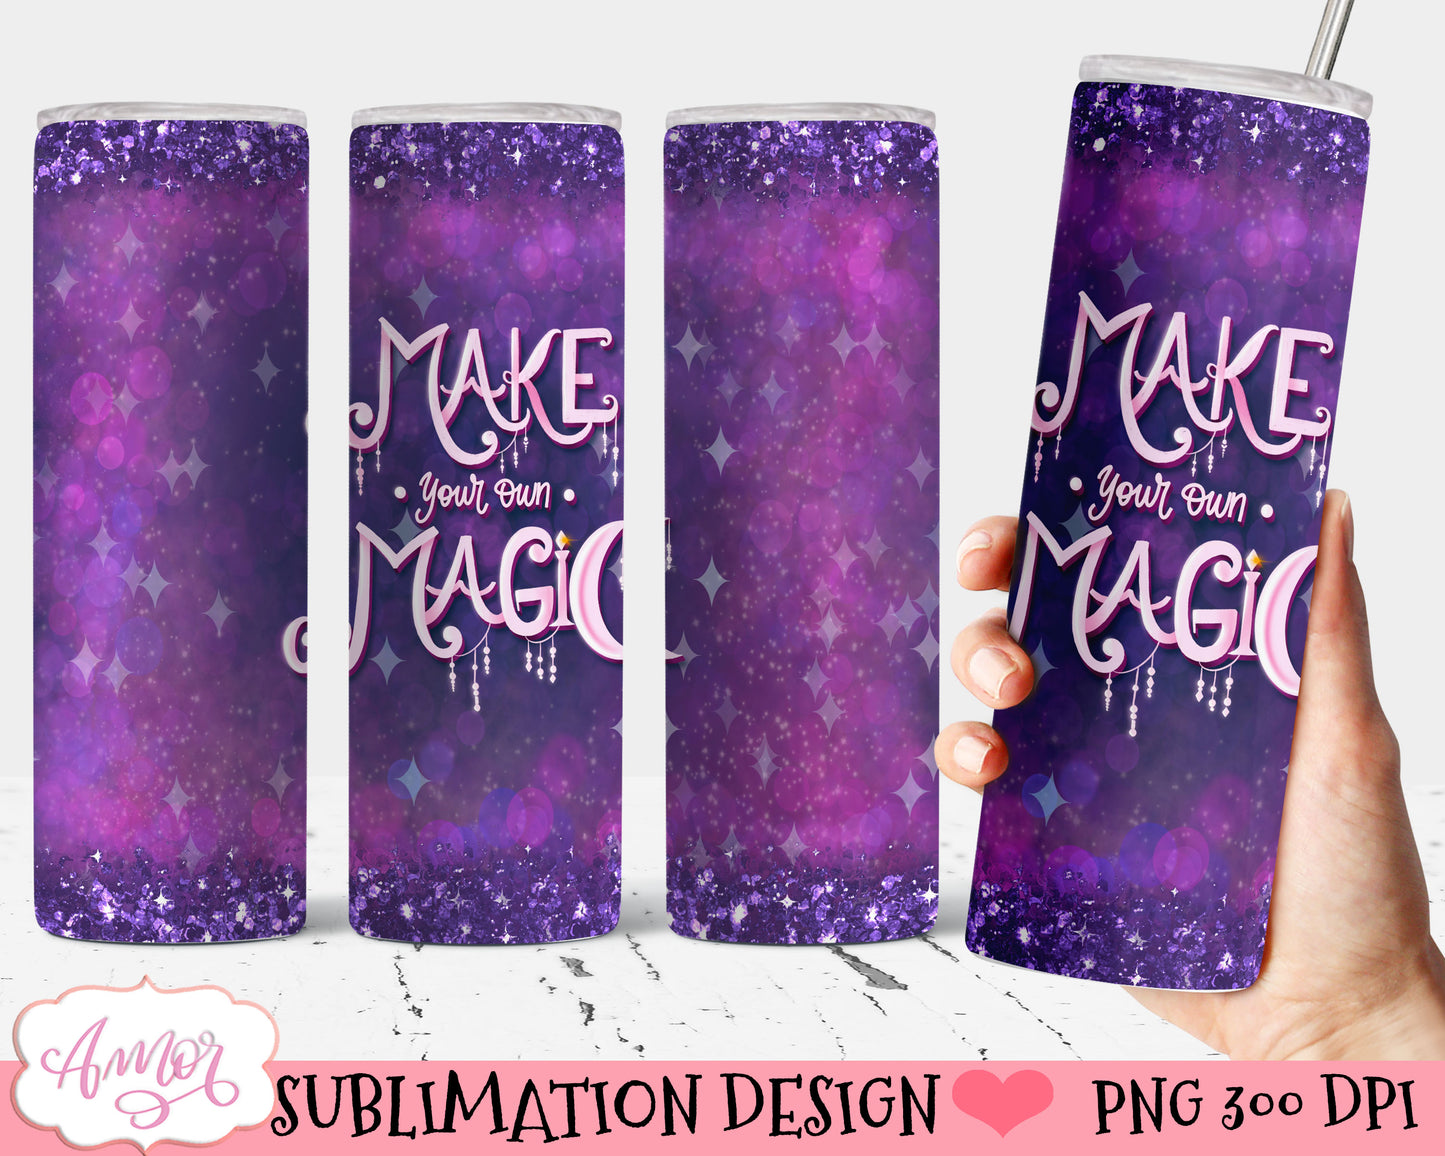 Make your own magic Tumbler Wrap for Sublimation